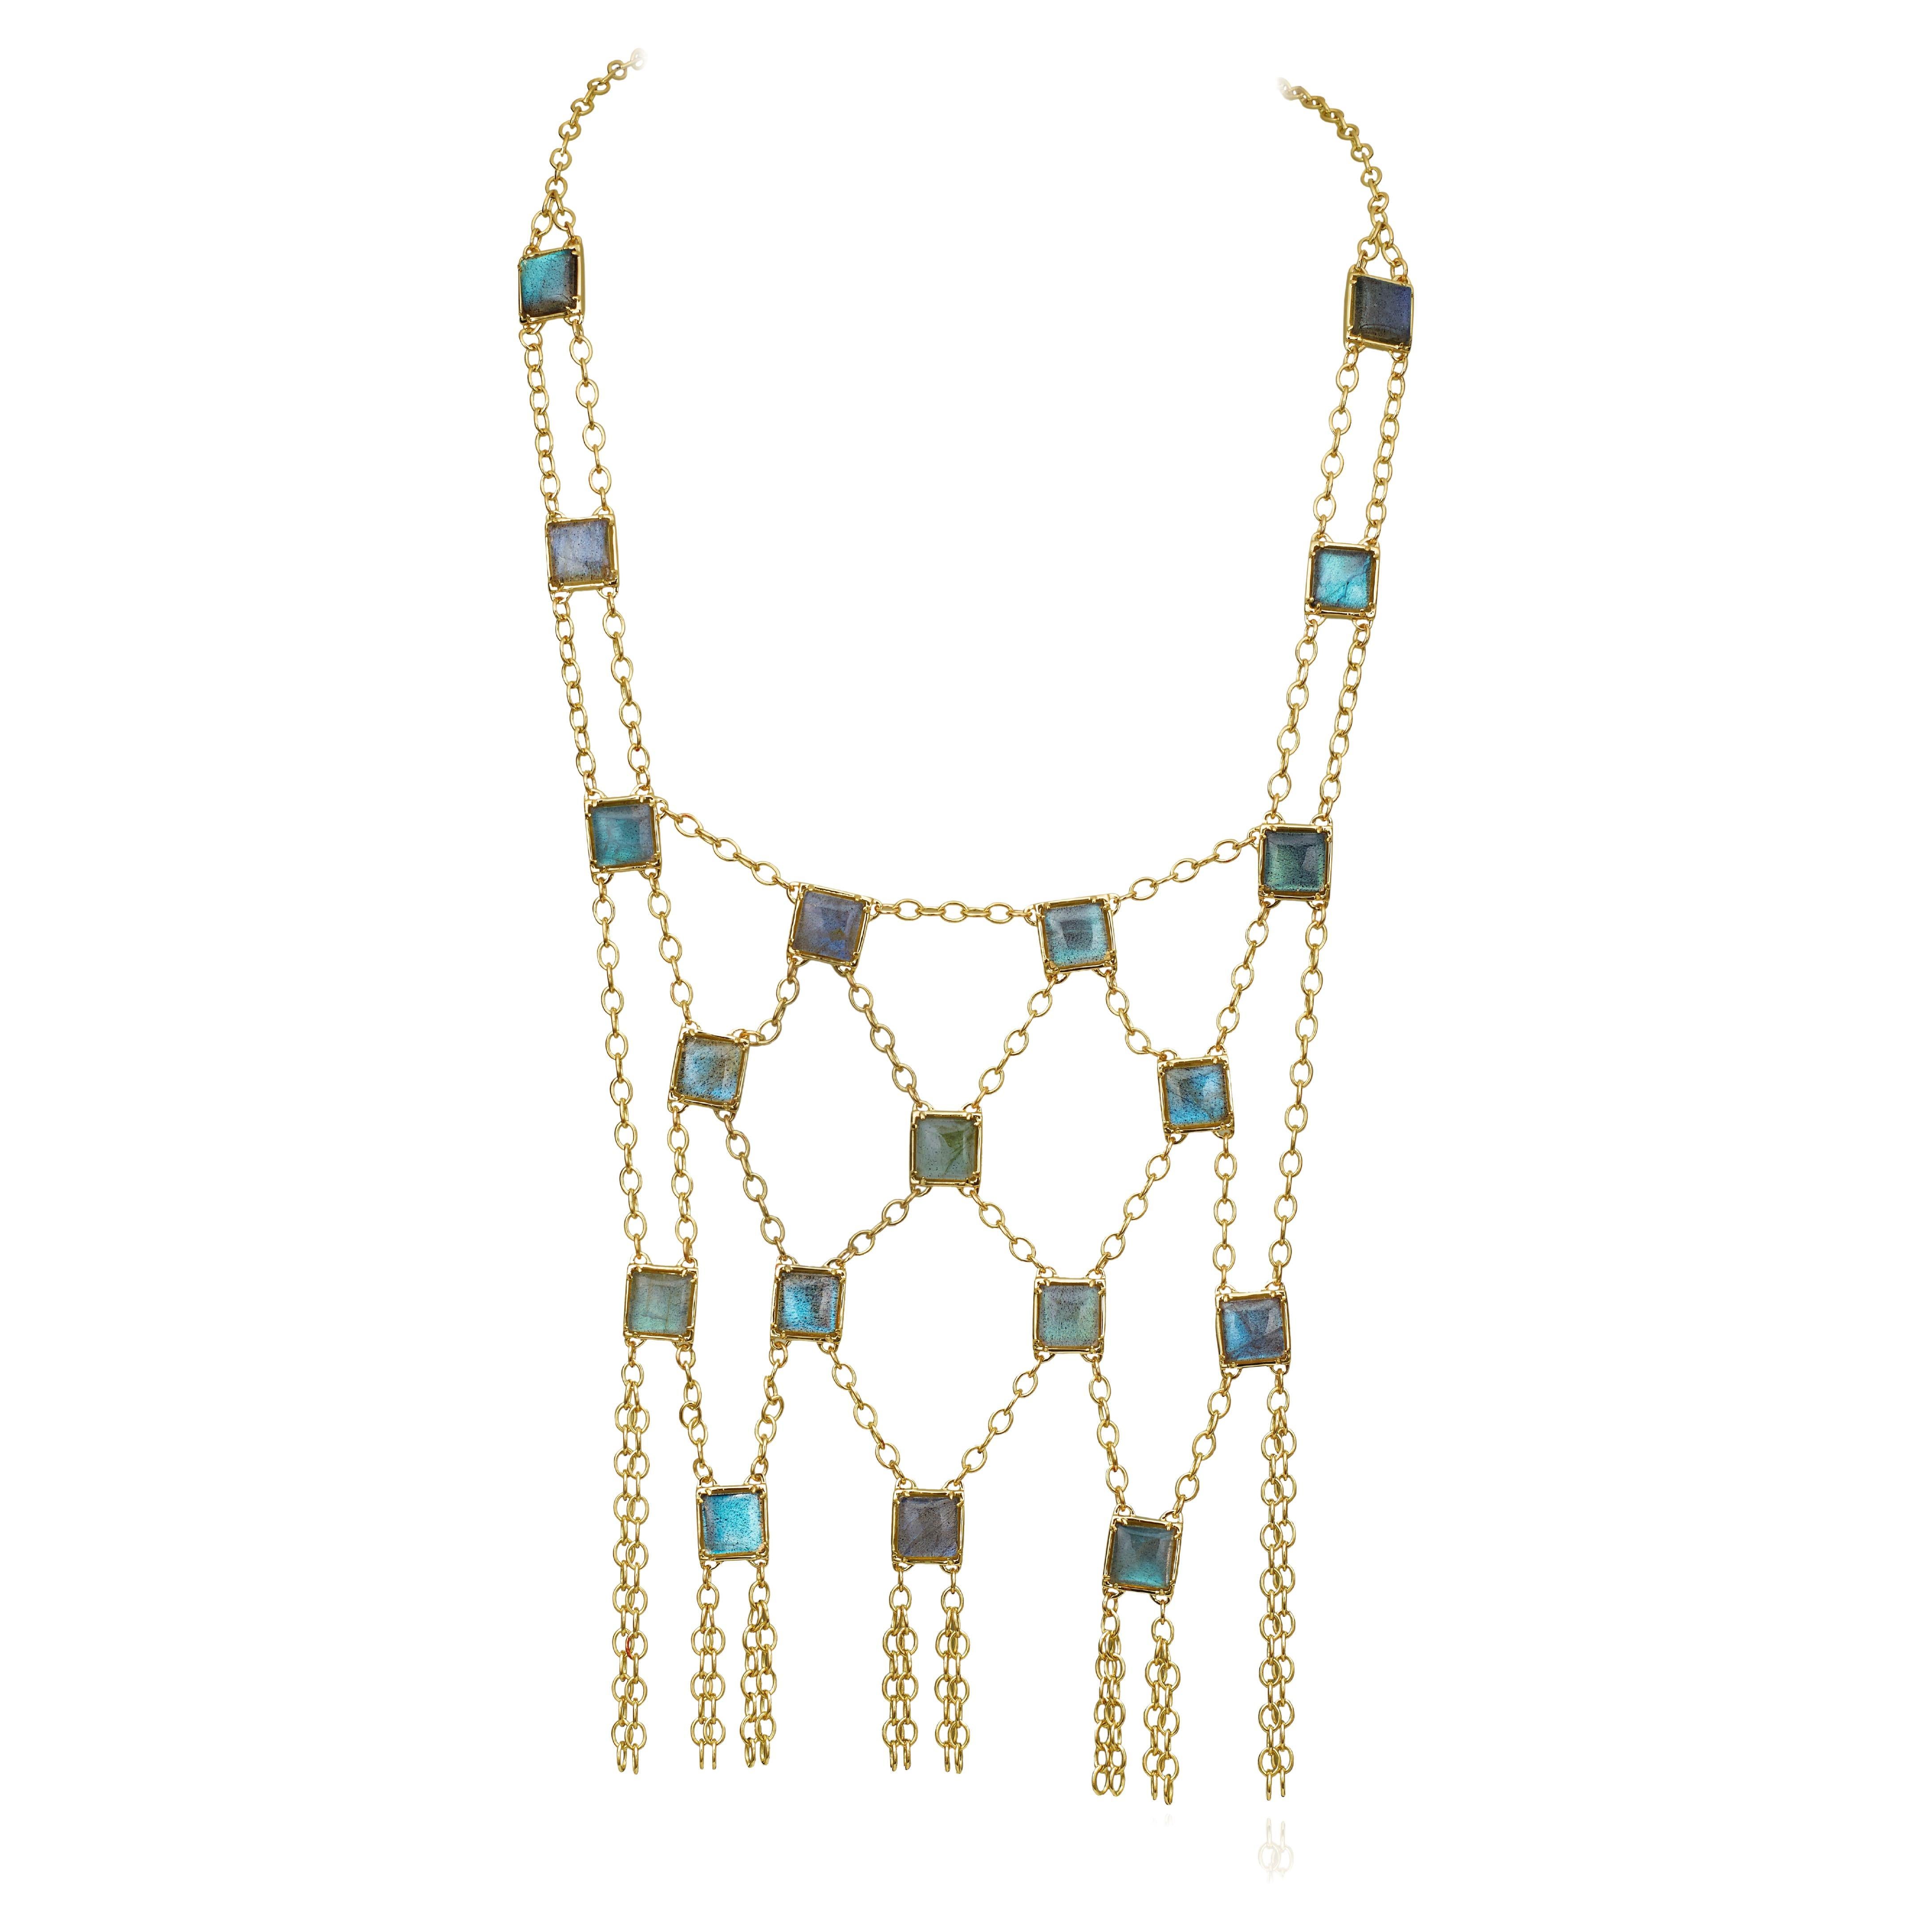 Yellow Gold Mesh Bib Necklace with Labradorite Square Cabochons For Sale